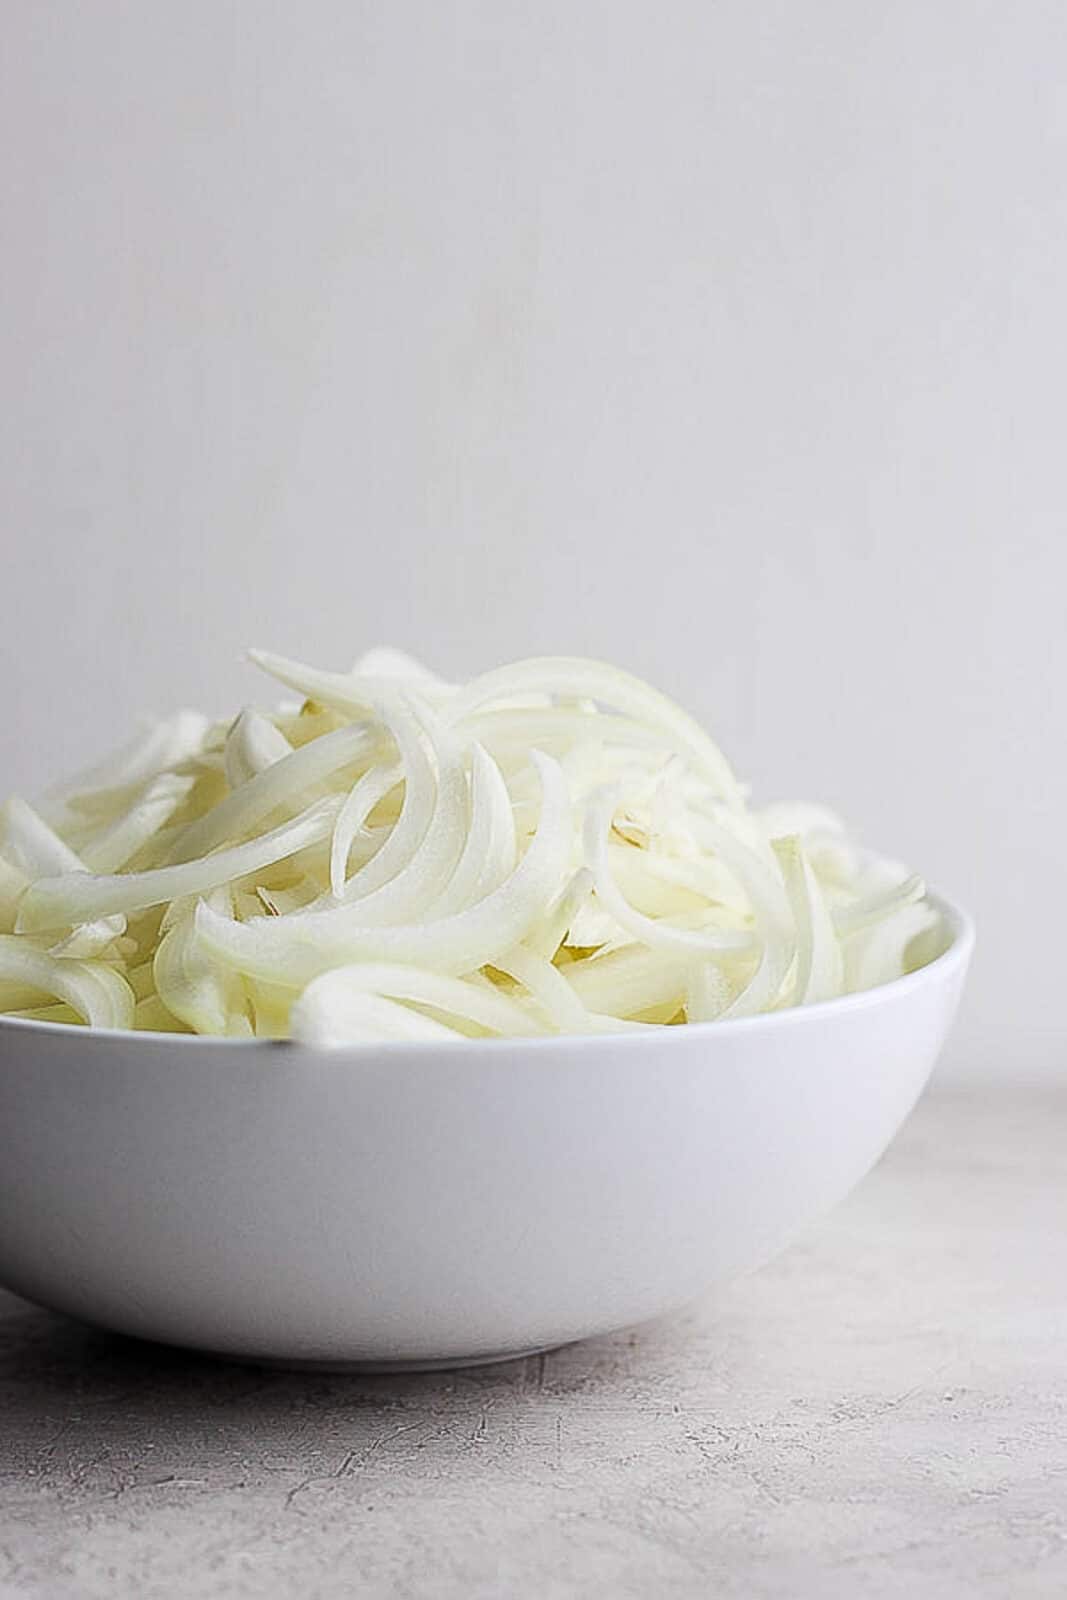 Onion slices in a bowl.